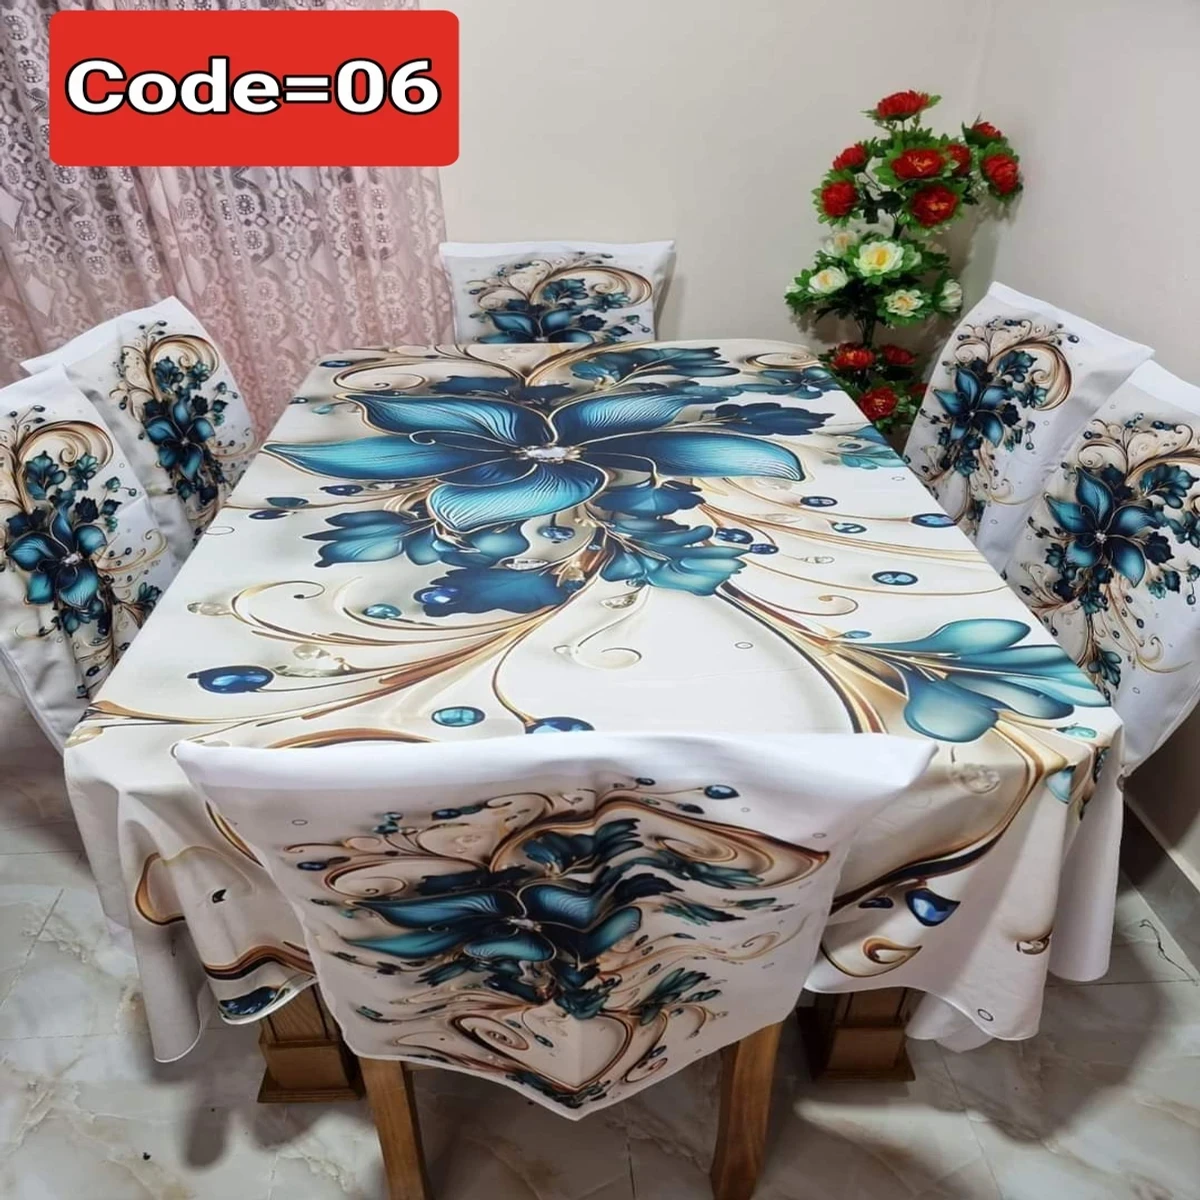 Dining table and chair cover code = 06